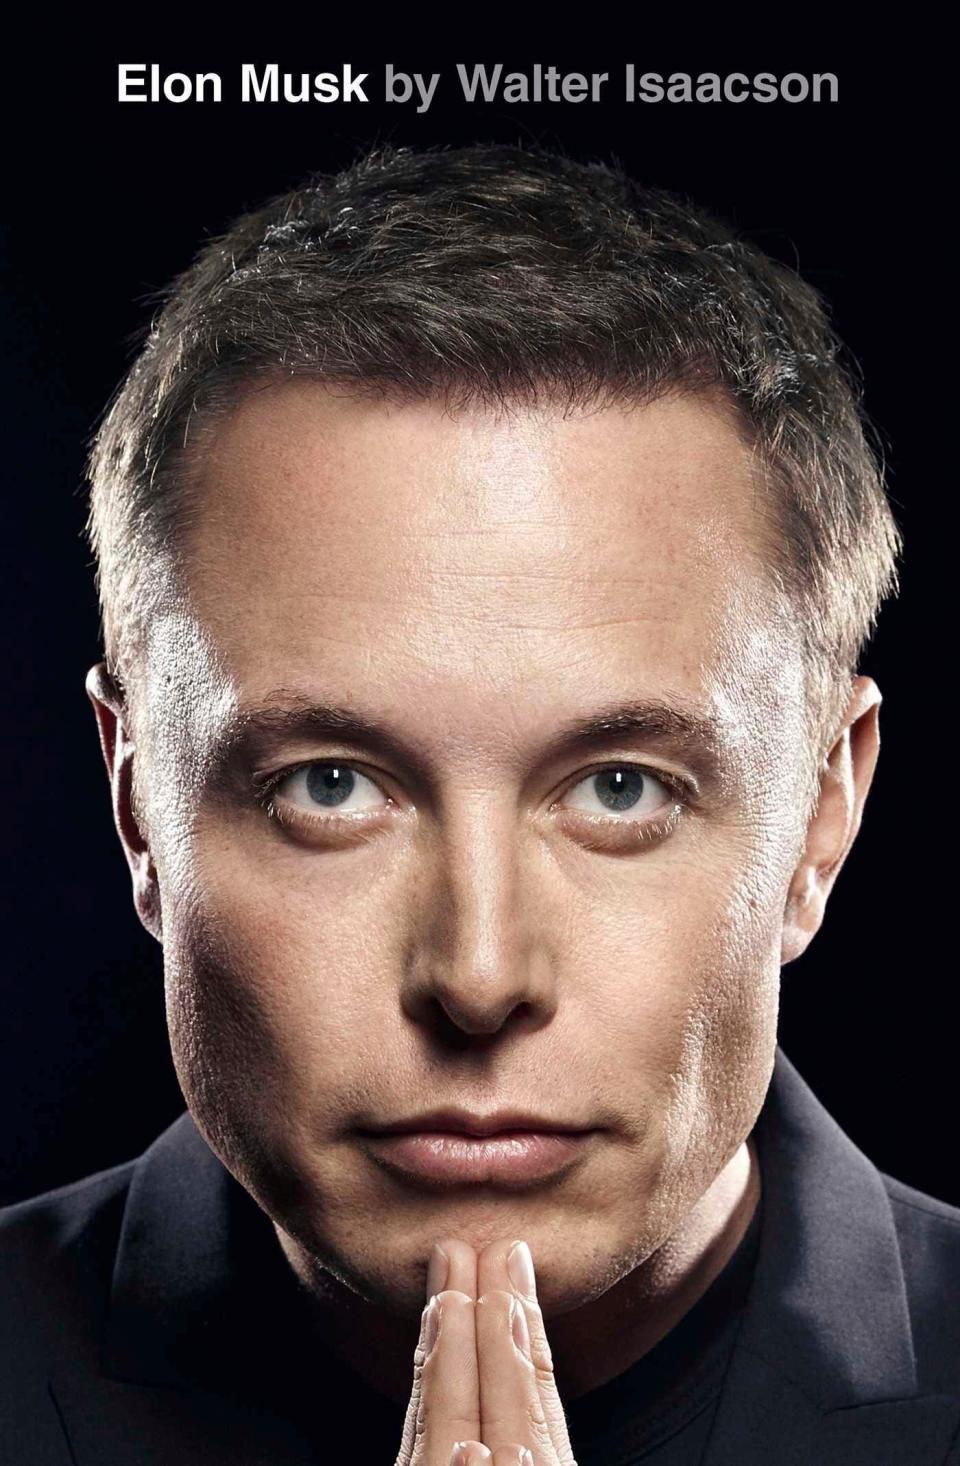 This cover image released by Simon & Schuster shows "Elon Musk" by Walter Isaacson. (Simon & Schuster via AP)